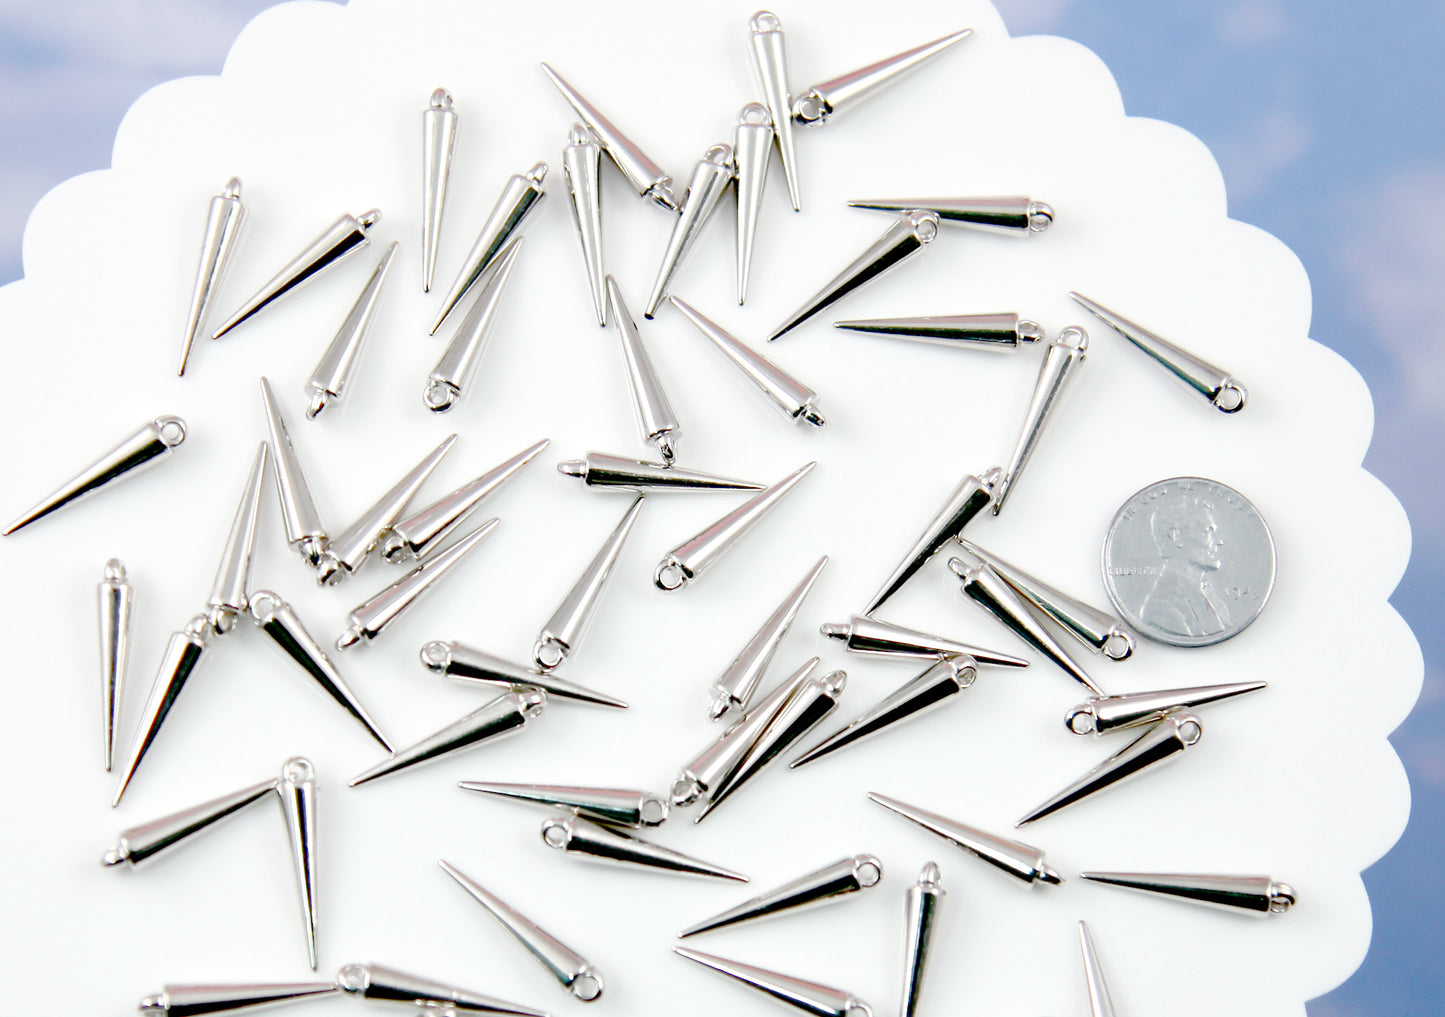 Spike Charms - 30 pc set - 23mm Spiky Charm - Electroplated Silver - With Holes to Easily make Jewelry